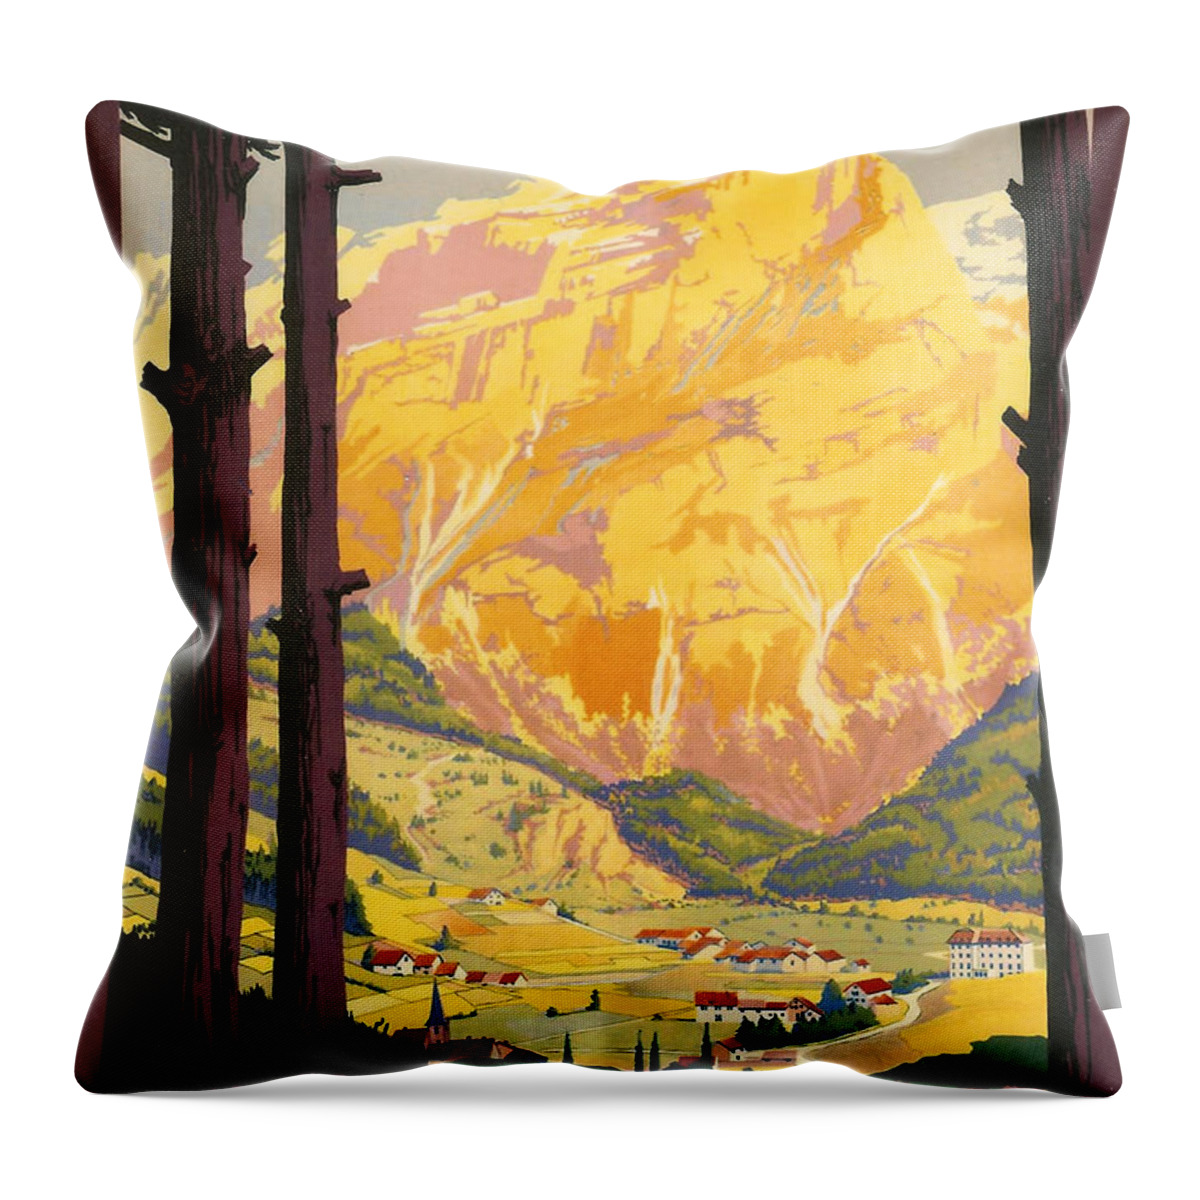 Vintage Travel Throw Pillow featuring the digital art En Tarentaise - Vintage French Travel by Georgia Clare